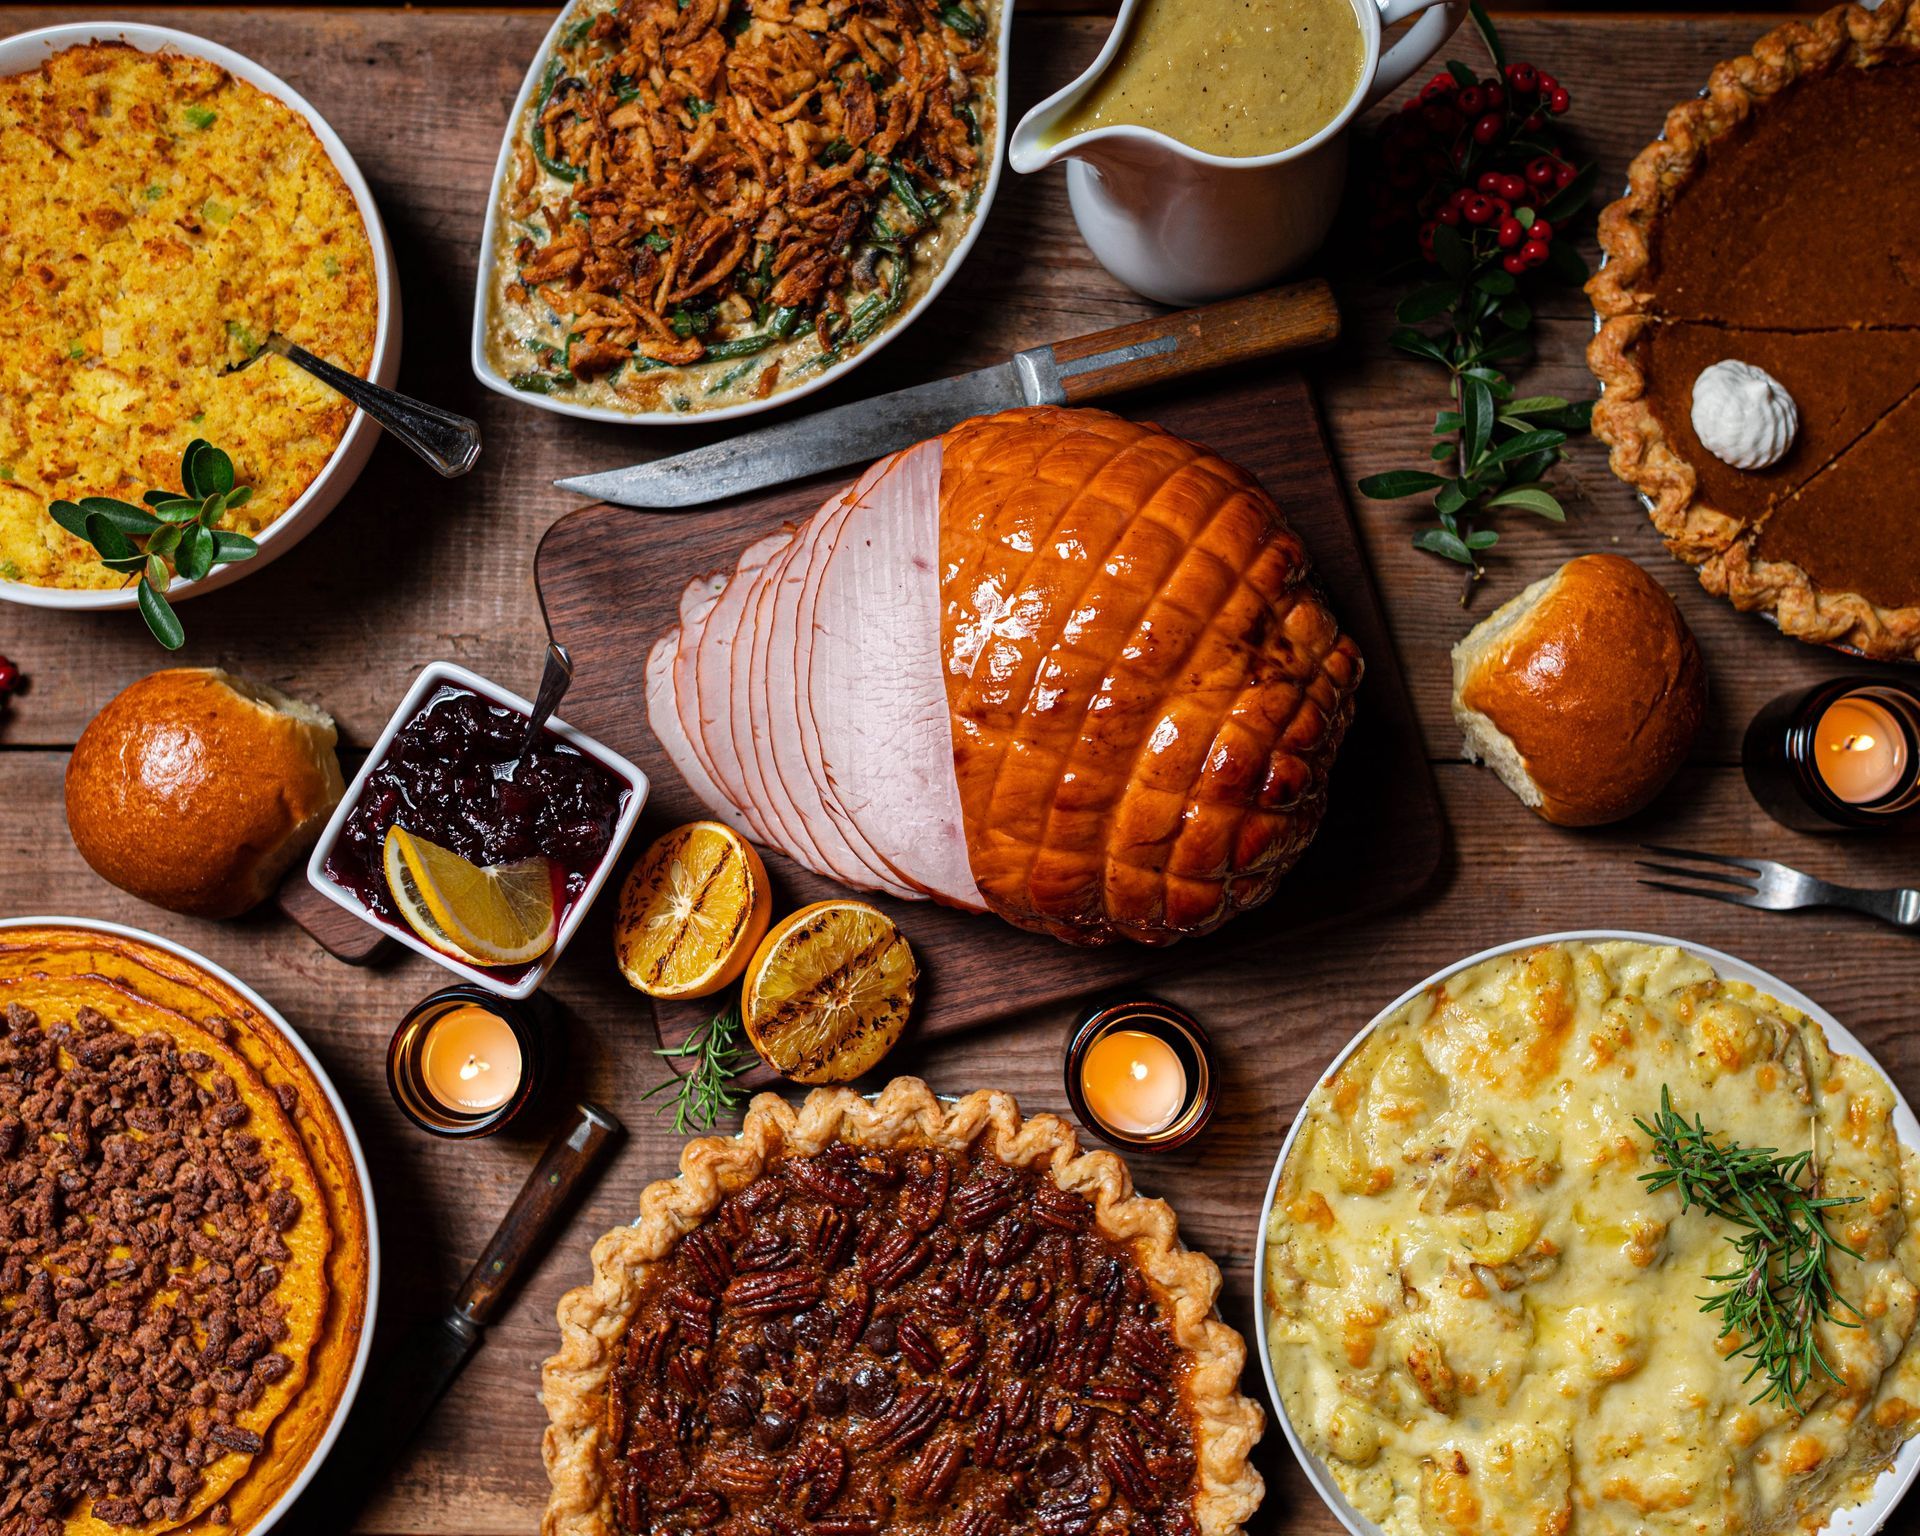 There are many different types of food on the table for thanksgiving.